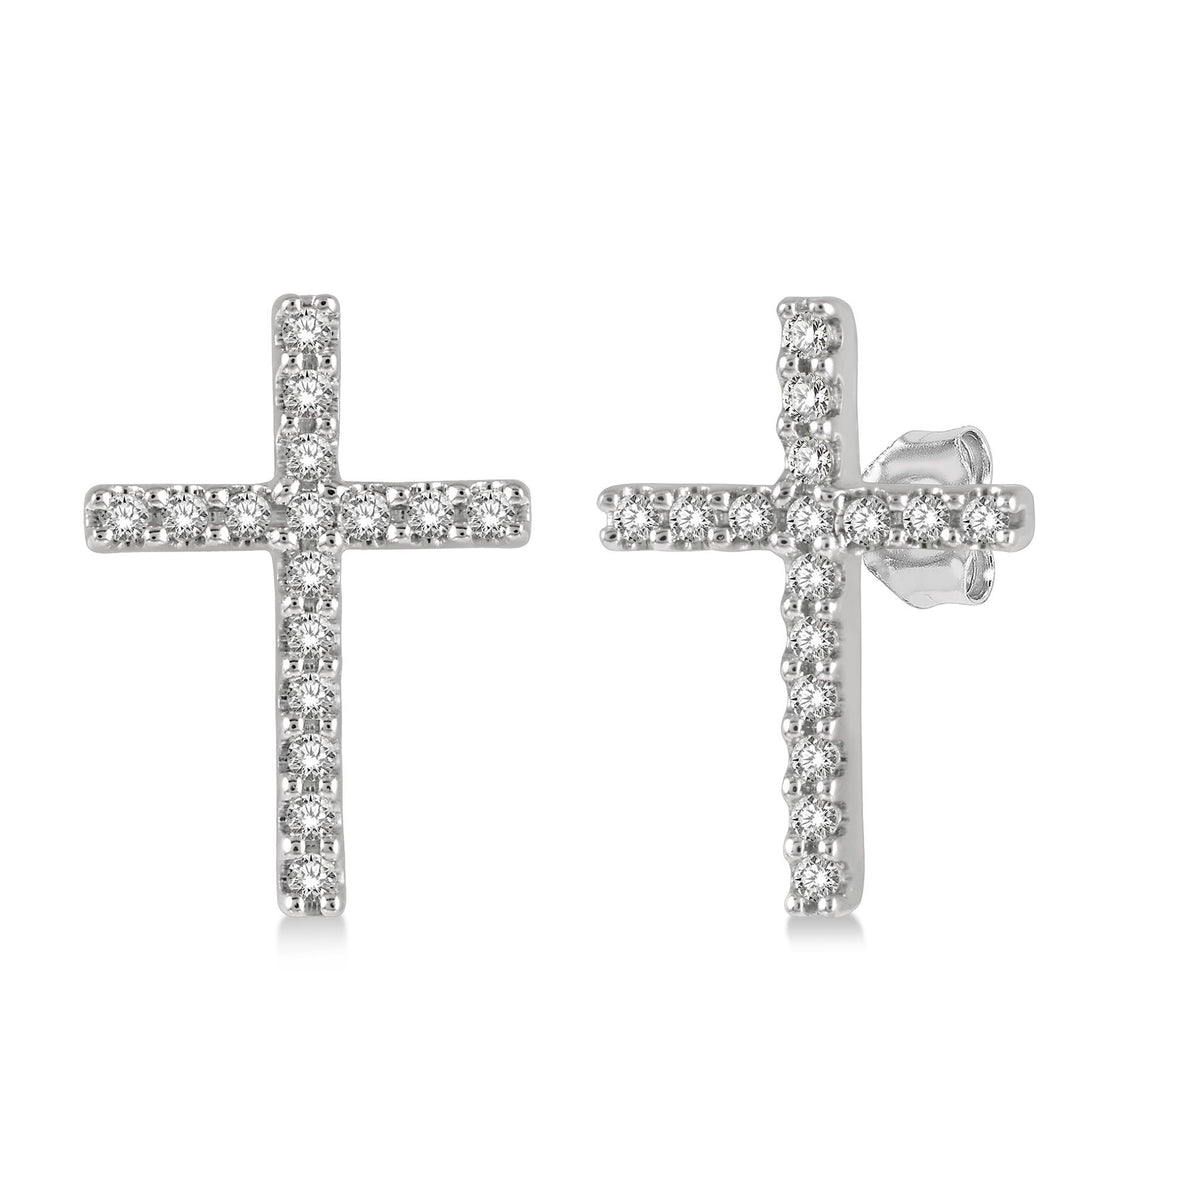 Lasker Petites-10Kt White Gold Cross Earrings with .10 cttw Natural Diamonds